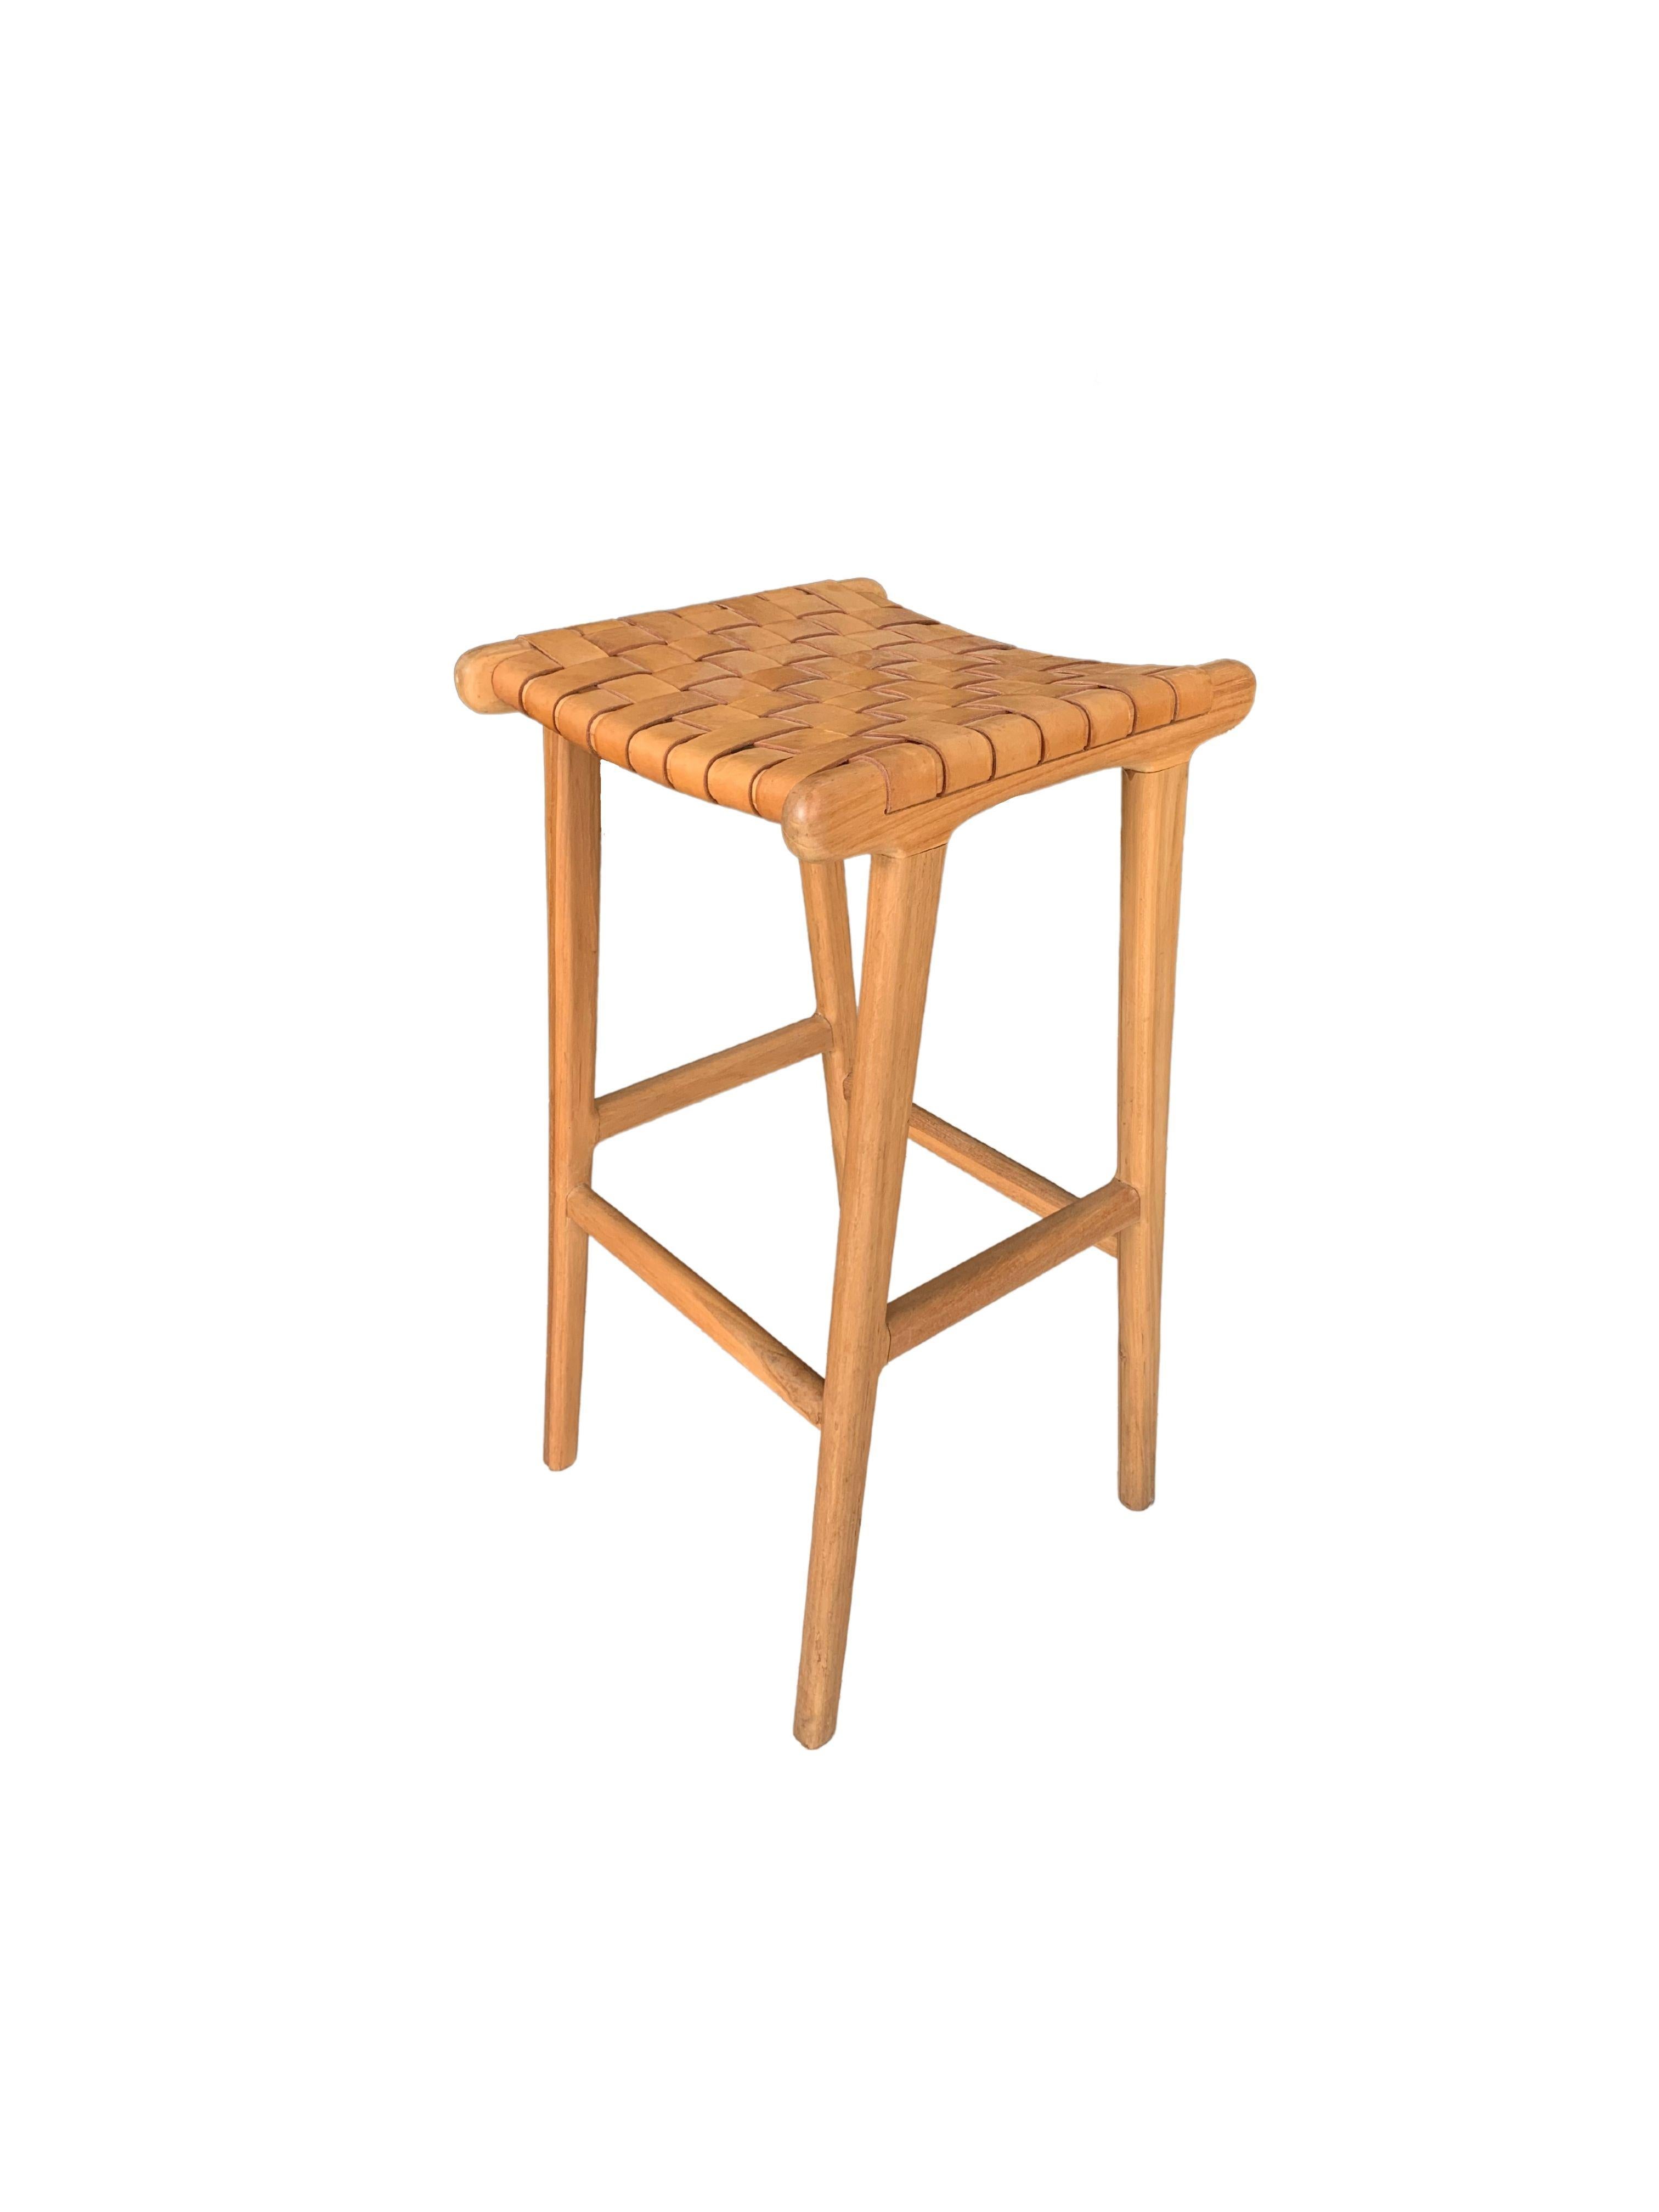 A hand-crafted teak framed & woven leather strap stool. These stools are crafted by local artisans using a wood joinery technique without the use of nails. They feature a subtle wood texture and are robust and sturdy.